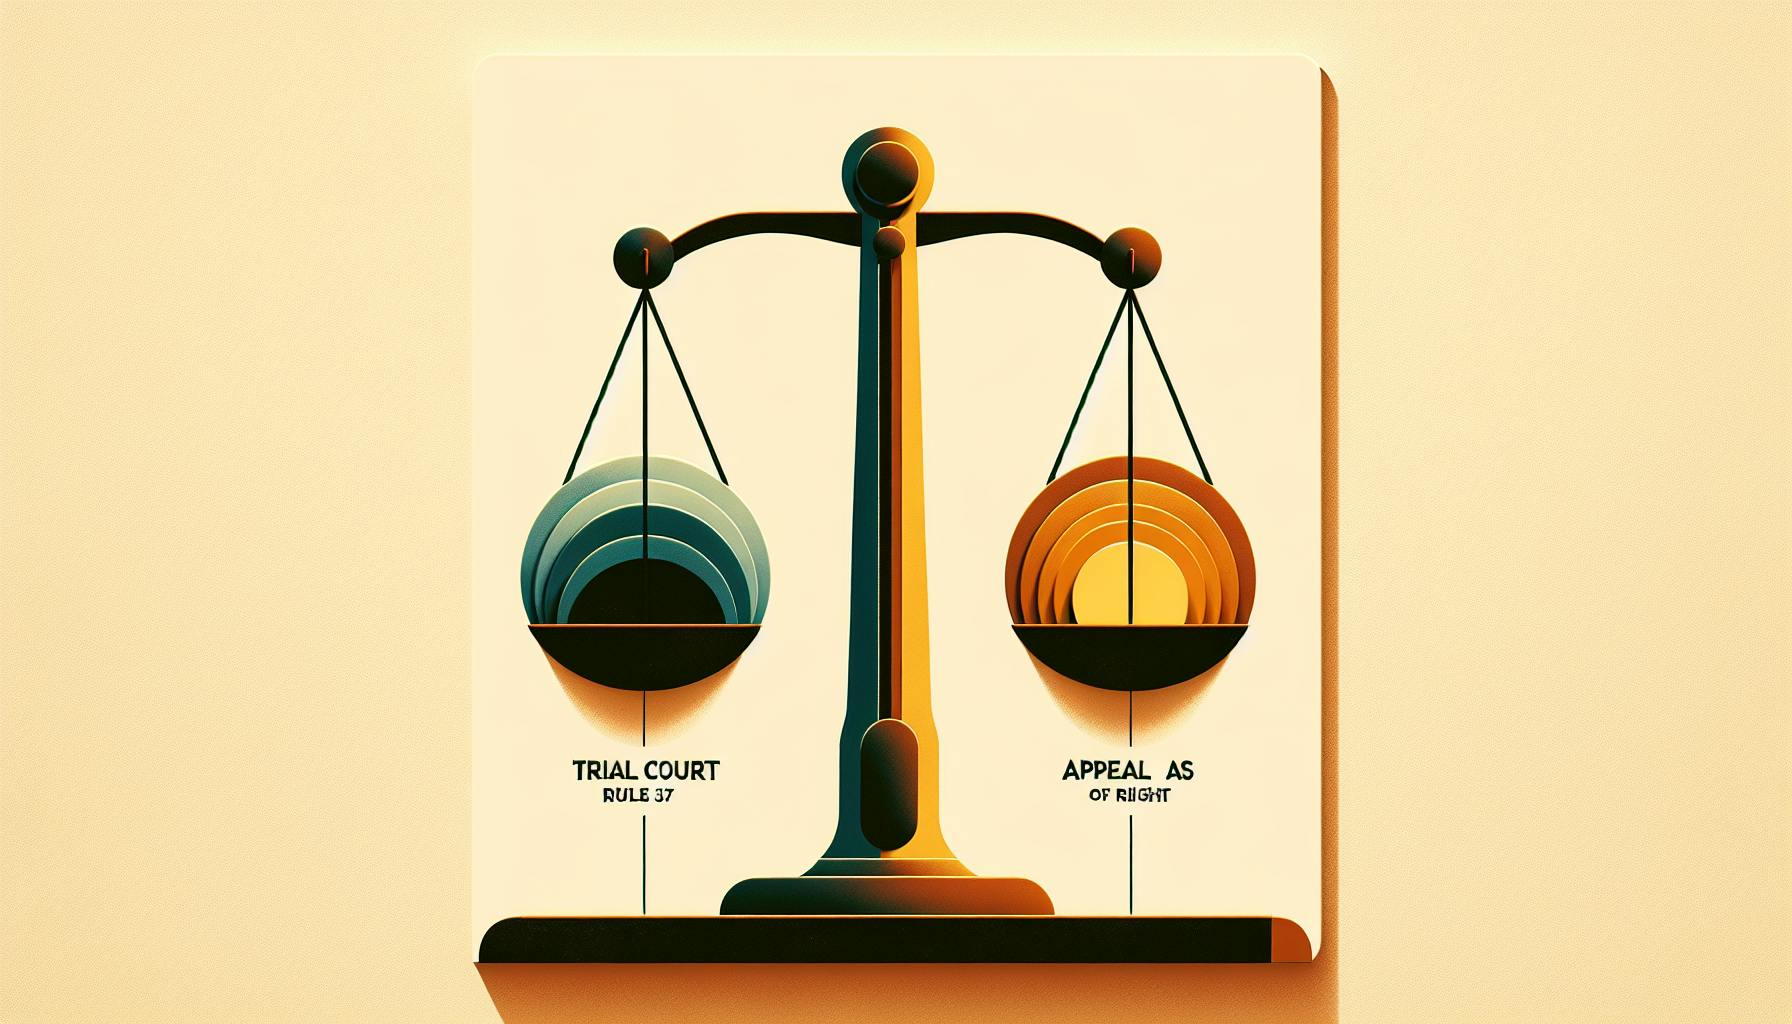 Federal Criminal Rule 37 Explained: Appeal as of Right to a District Judge